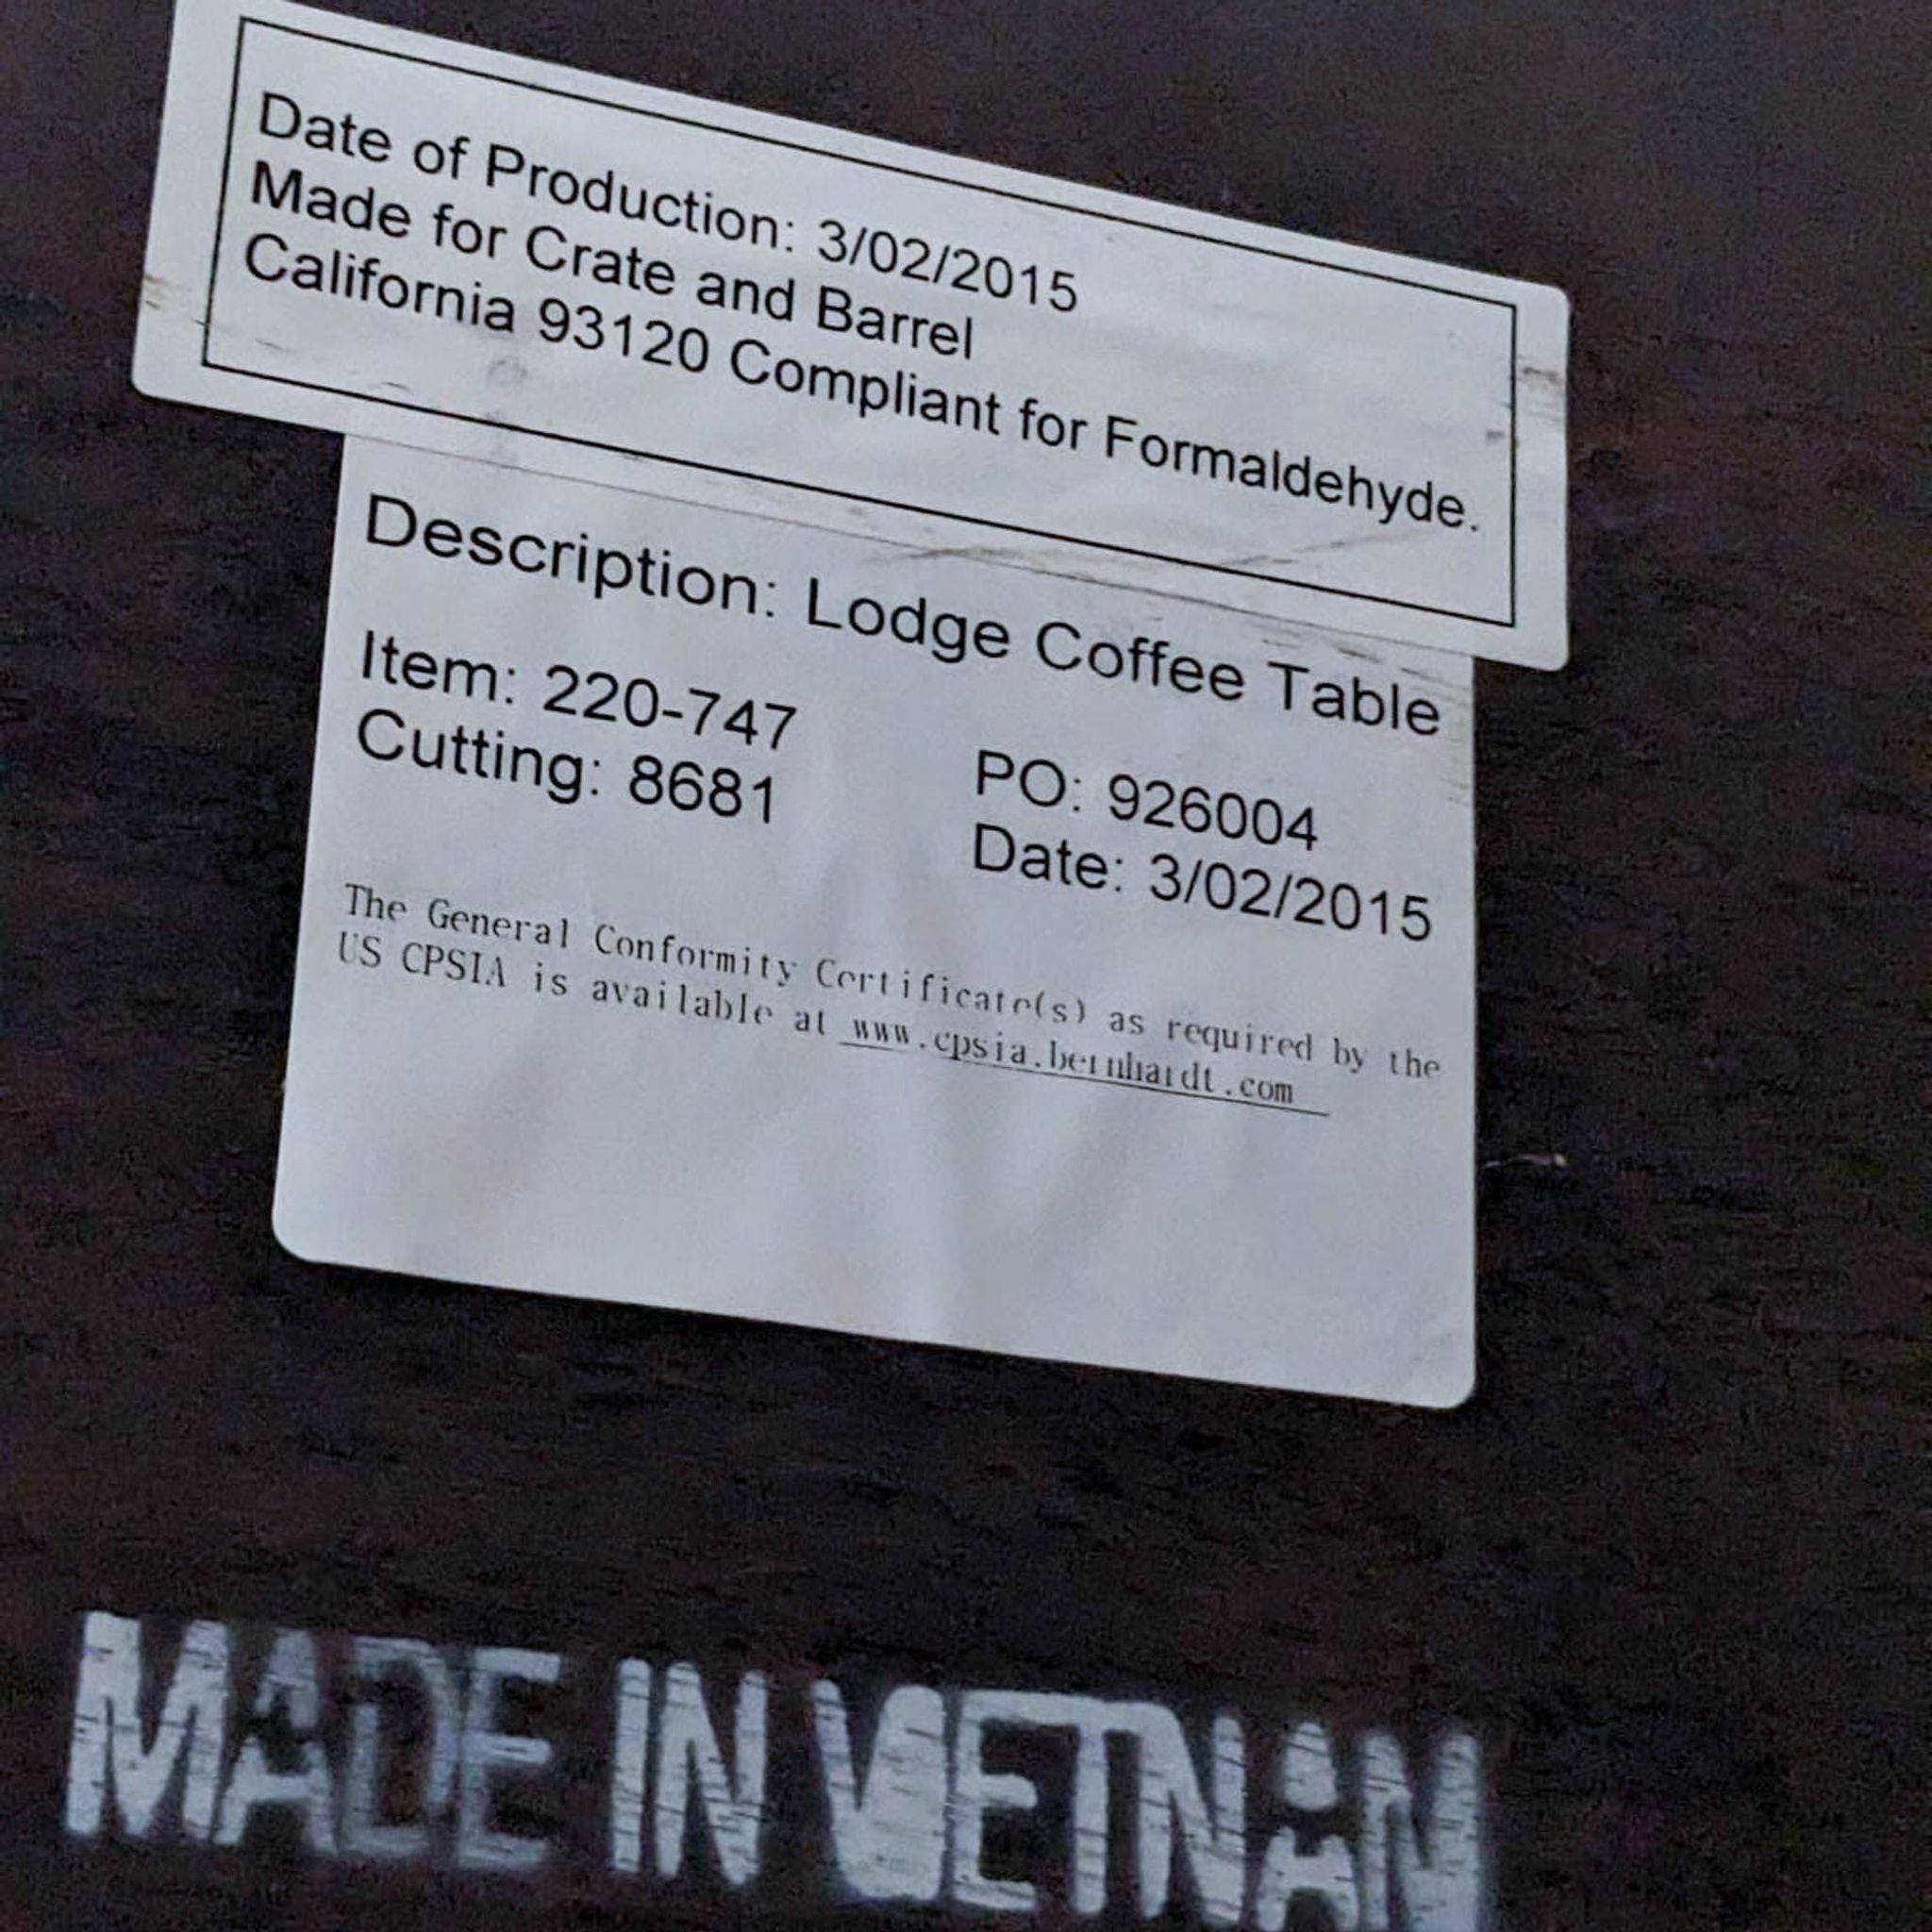 Close-up of the manufacturing label on a Crate & Barrel Lodge Coffee Table showing compliance and item details.